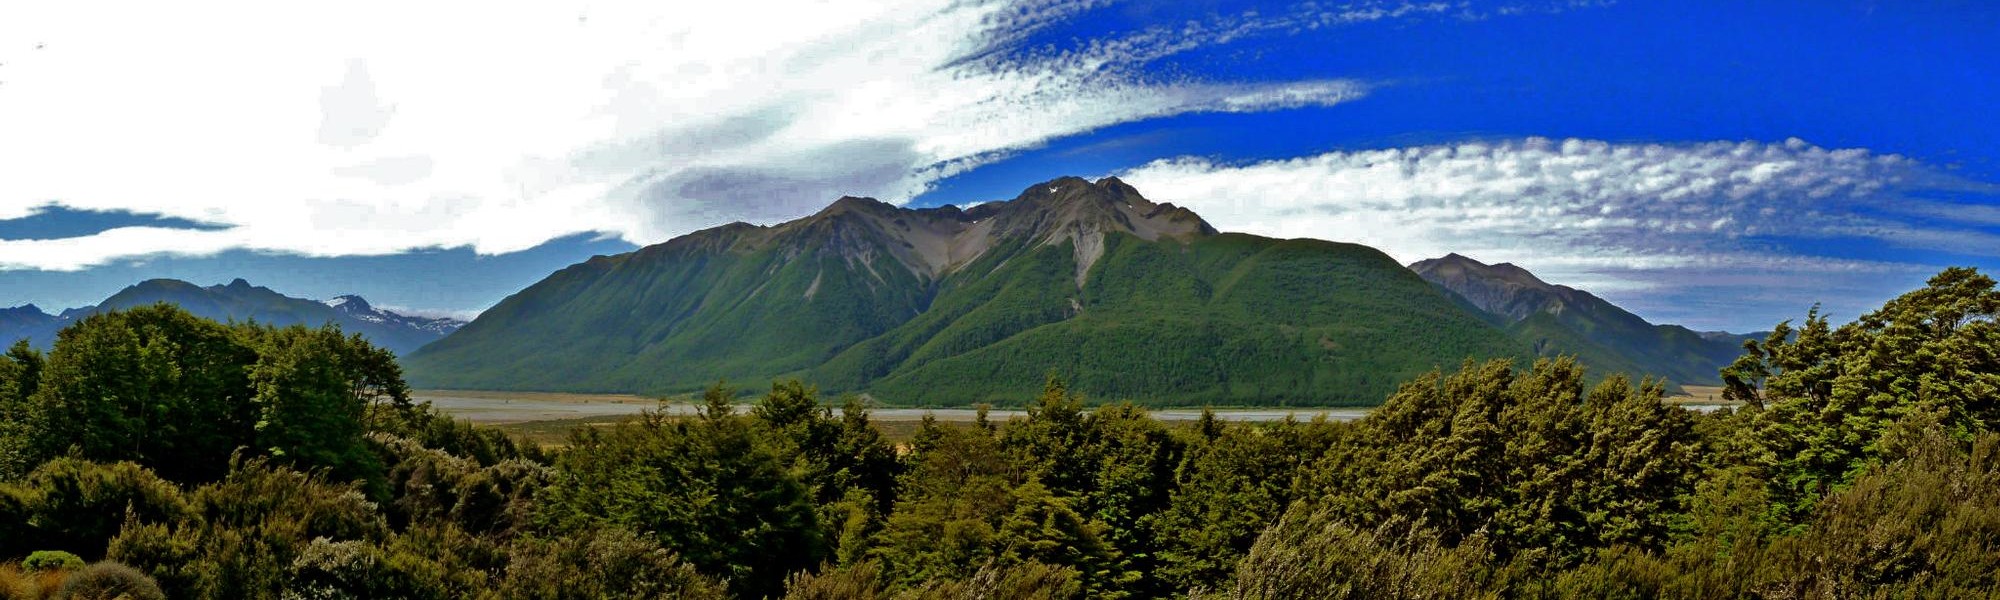 The view from New Zealand's Wilderness Lodge on the West Coast of the South Island is simply stunning